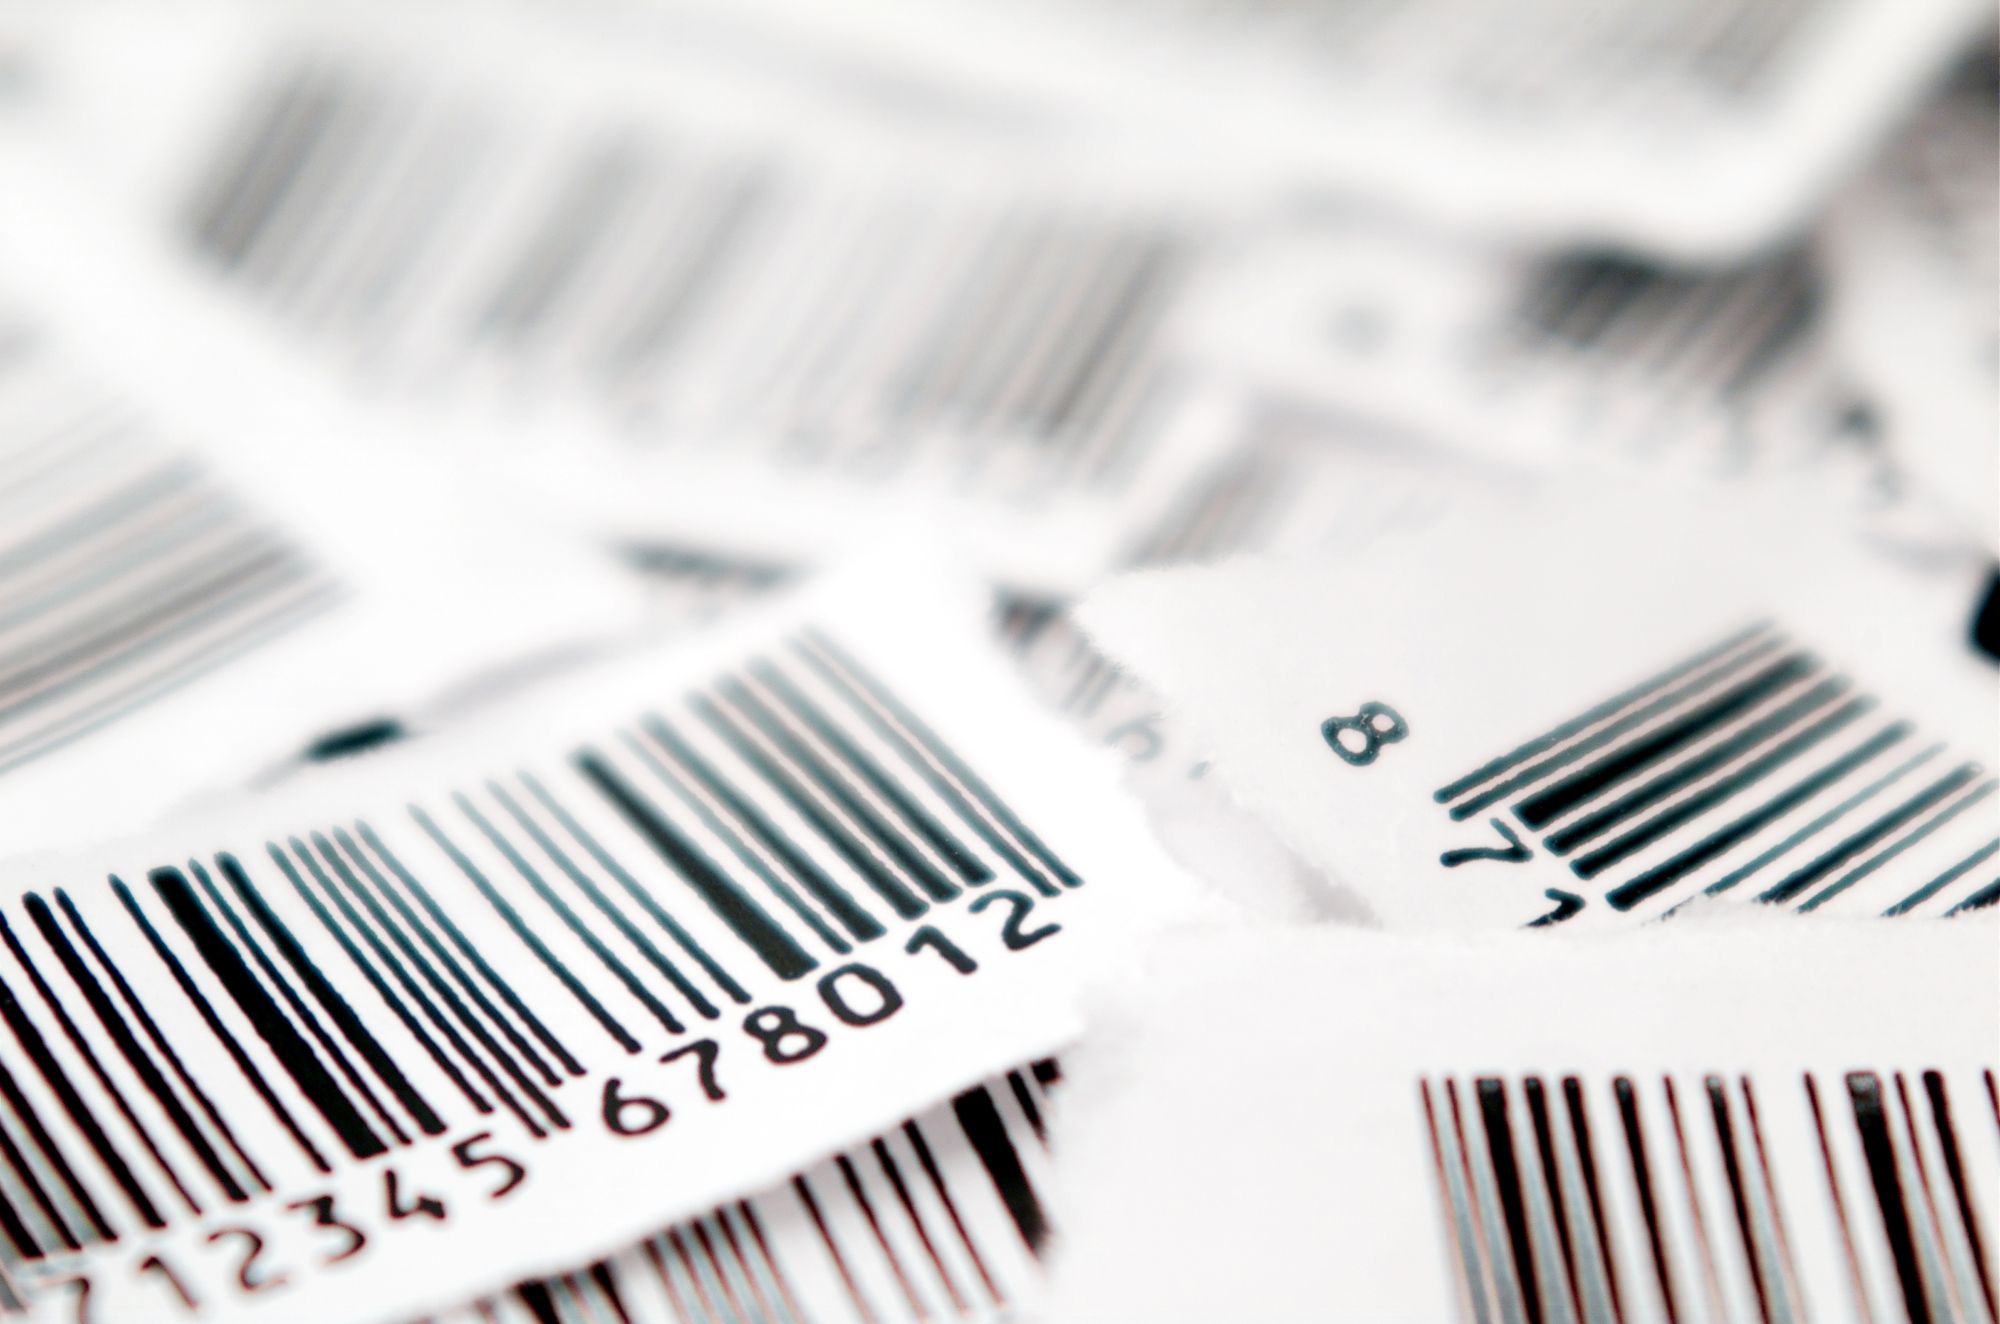 What Is A Barcode And How Do I Read One?